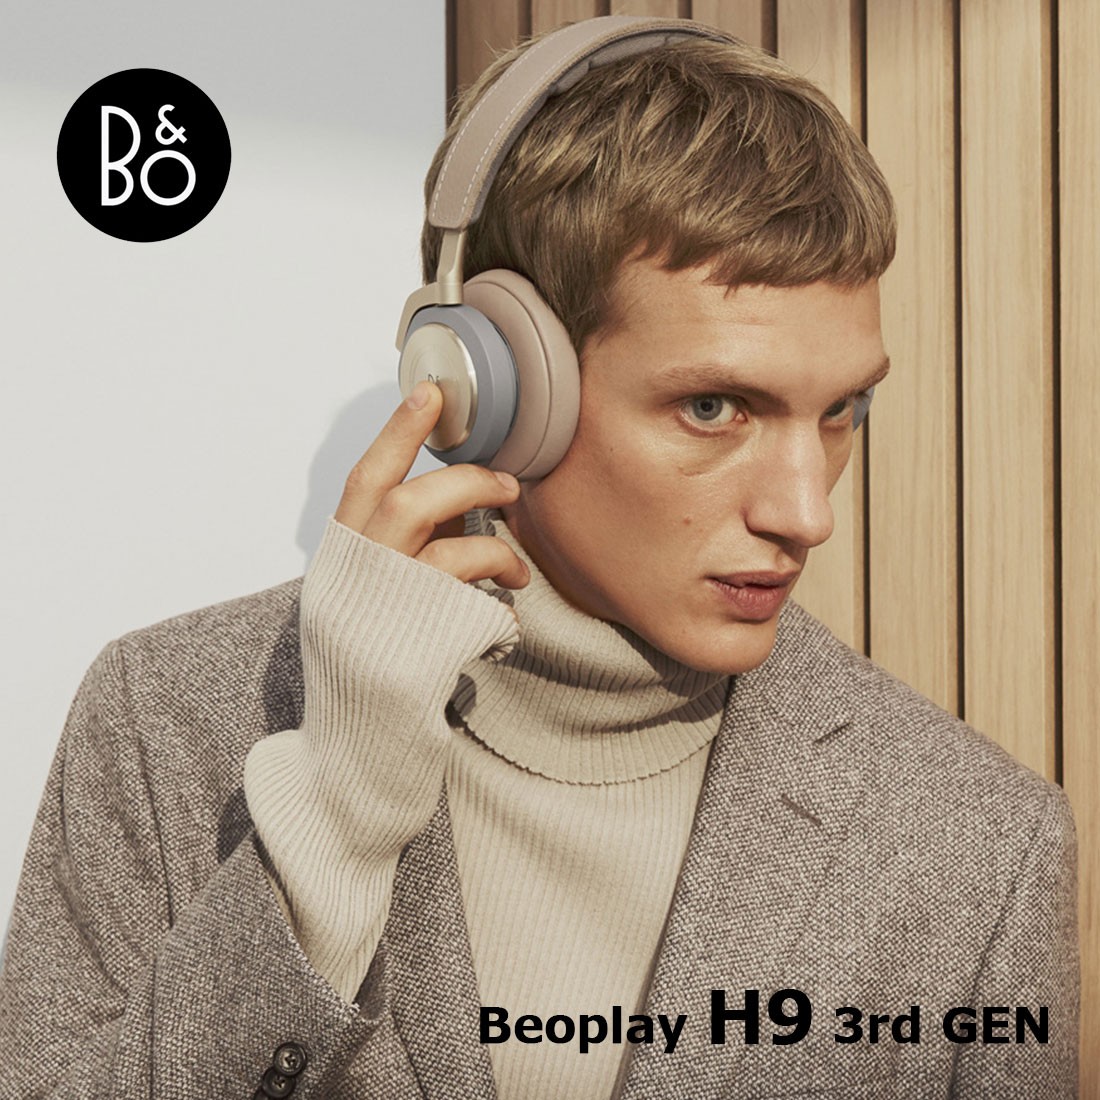 BANG  OLUFSEN】Beoplay H9 3rd Generation ヘッドホン ワイヤレス /バング＆オルフセン/ Bluetooth  4.2/ヤコブ・ワグナー/Google Voice Assistant :beoplay-h9i:ShinwaShop 通販  